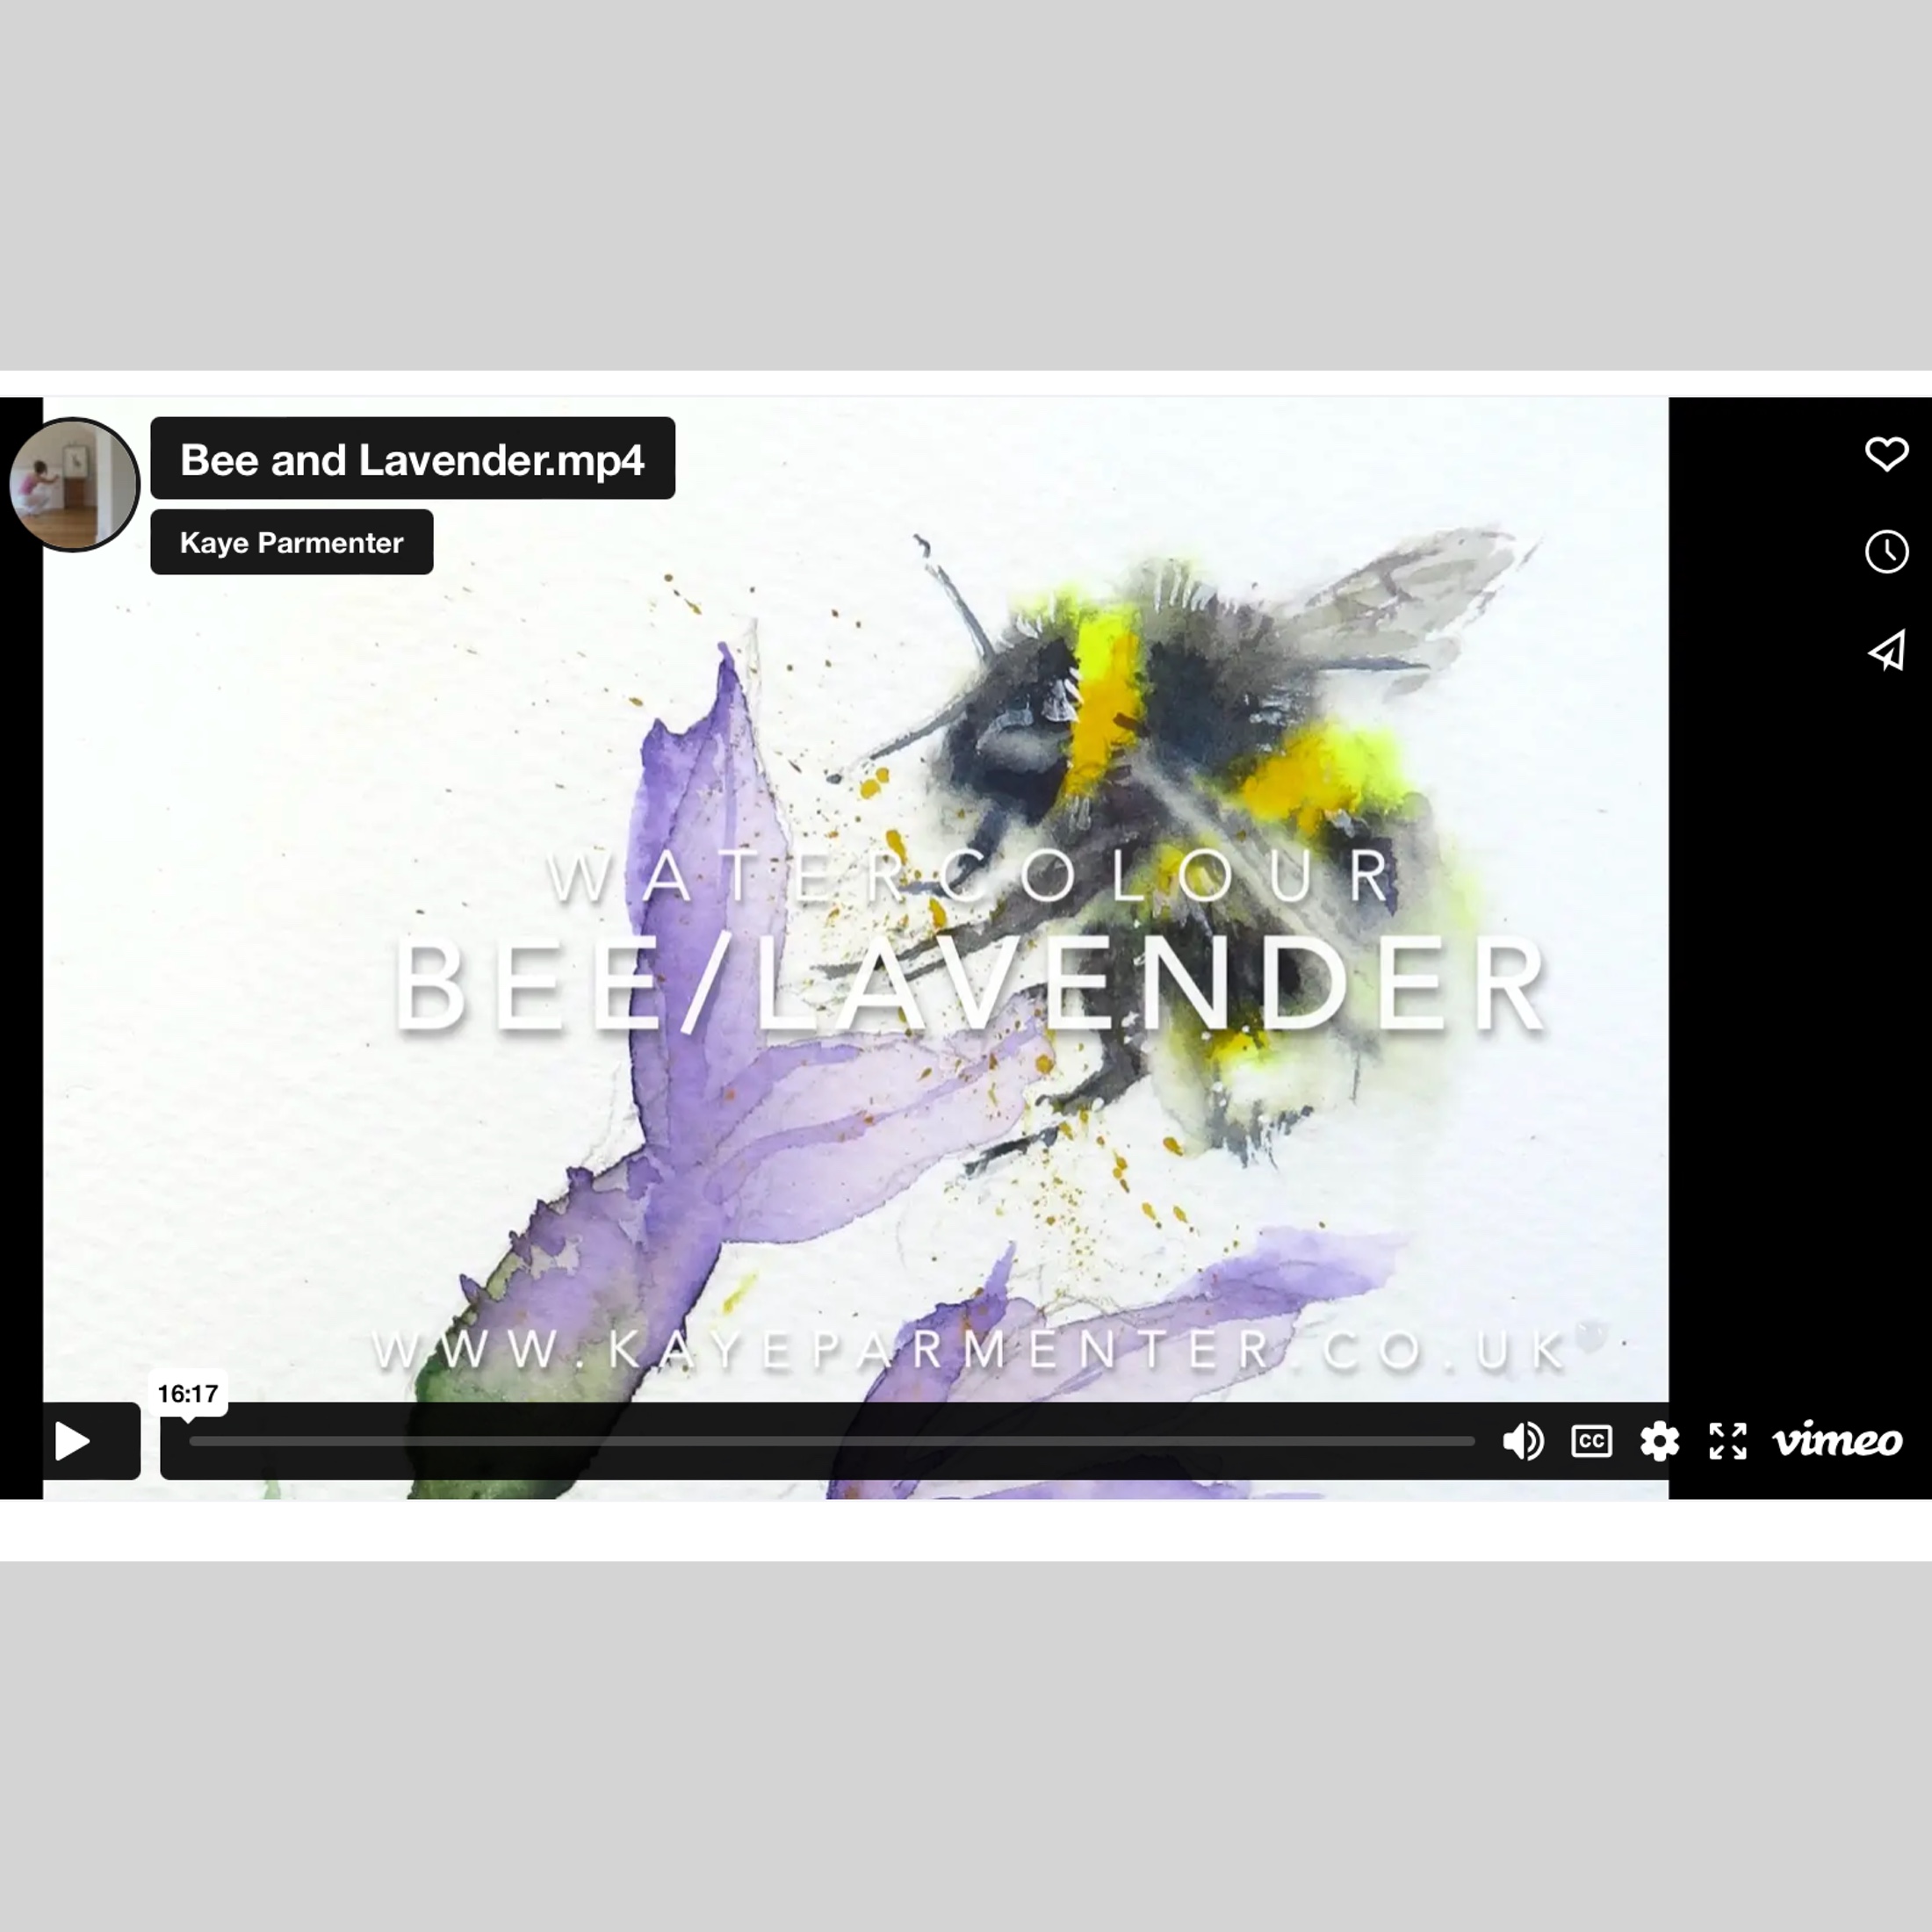 Bee and Lavender – online tuition